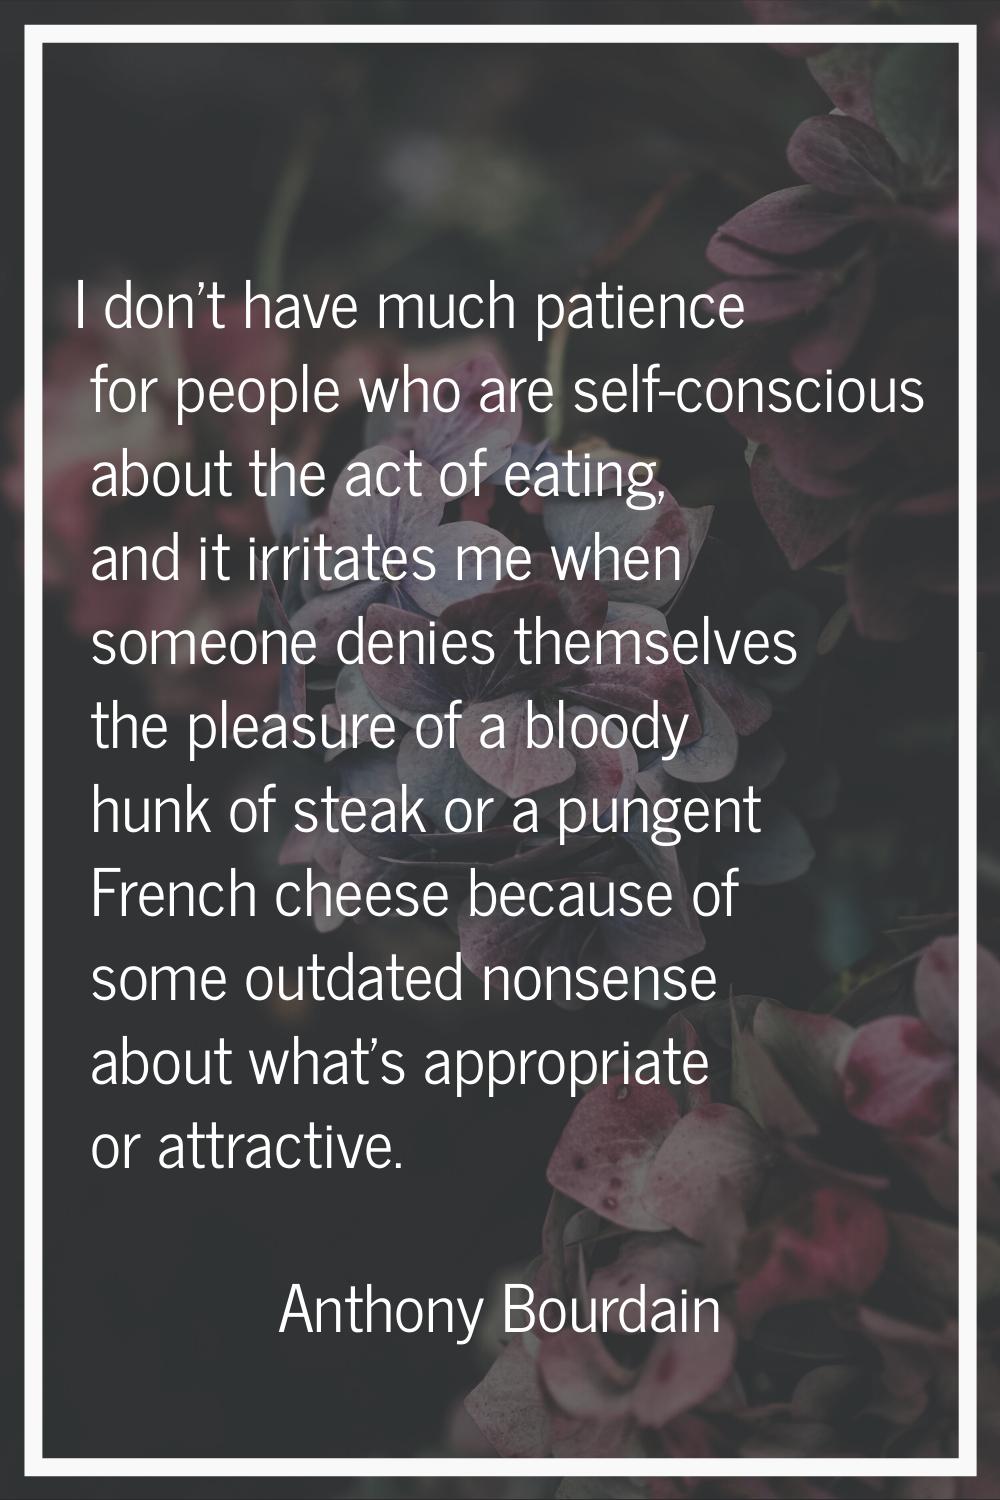 I don't have much patience for people who are self-conscious about the act of eating, and it irrita